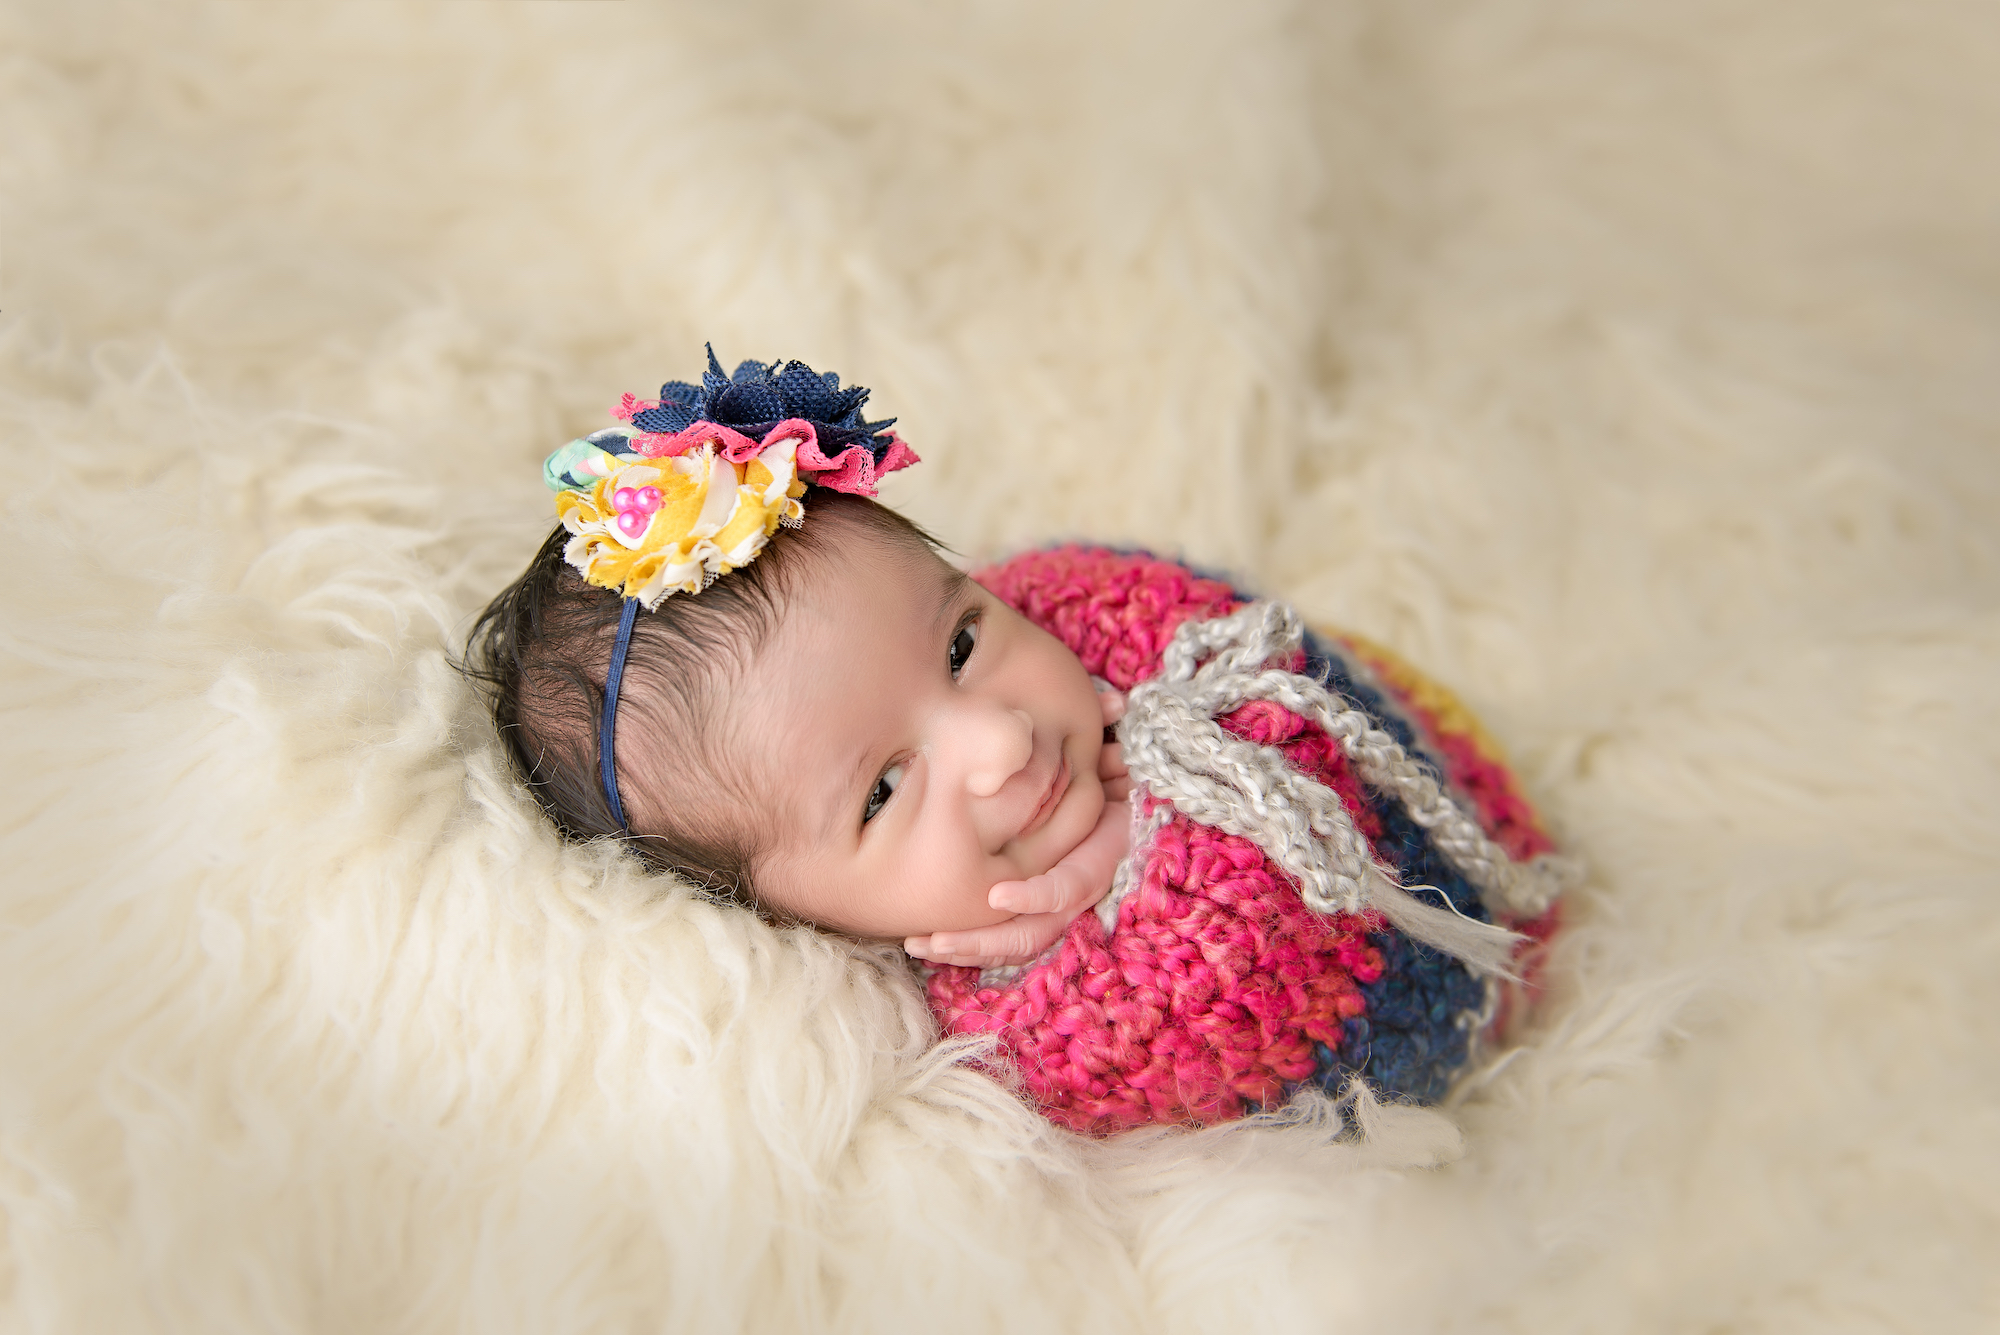 Newborn Photography Smiling At The Camera